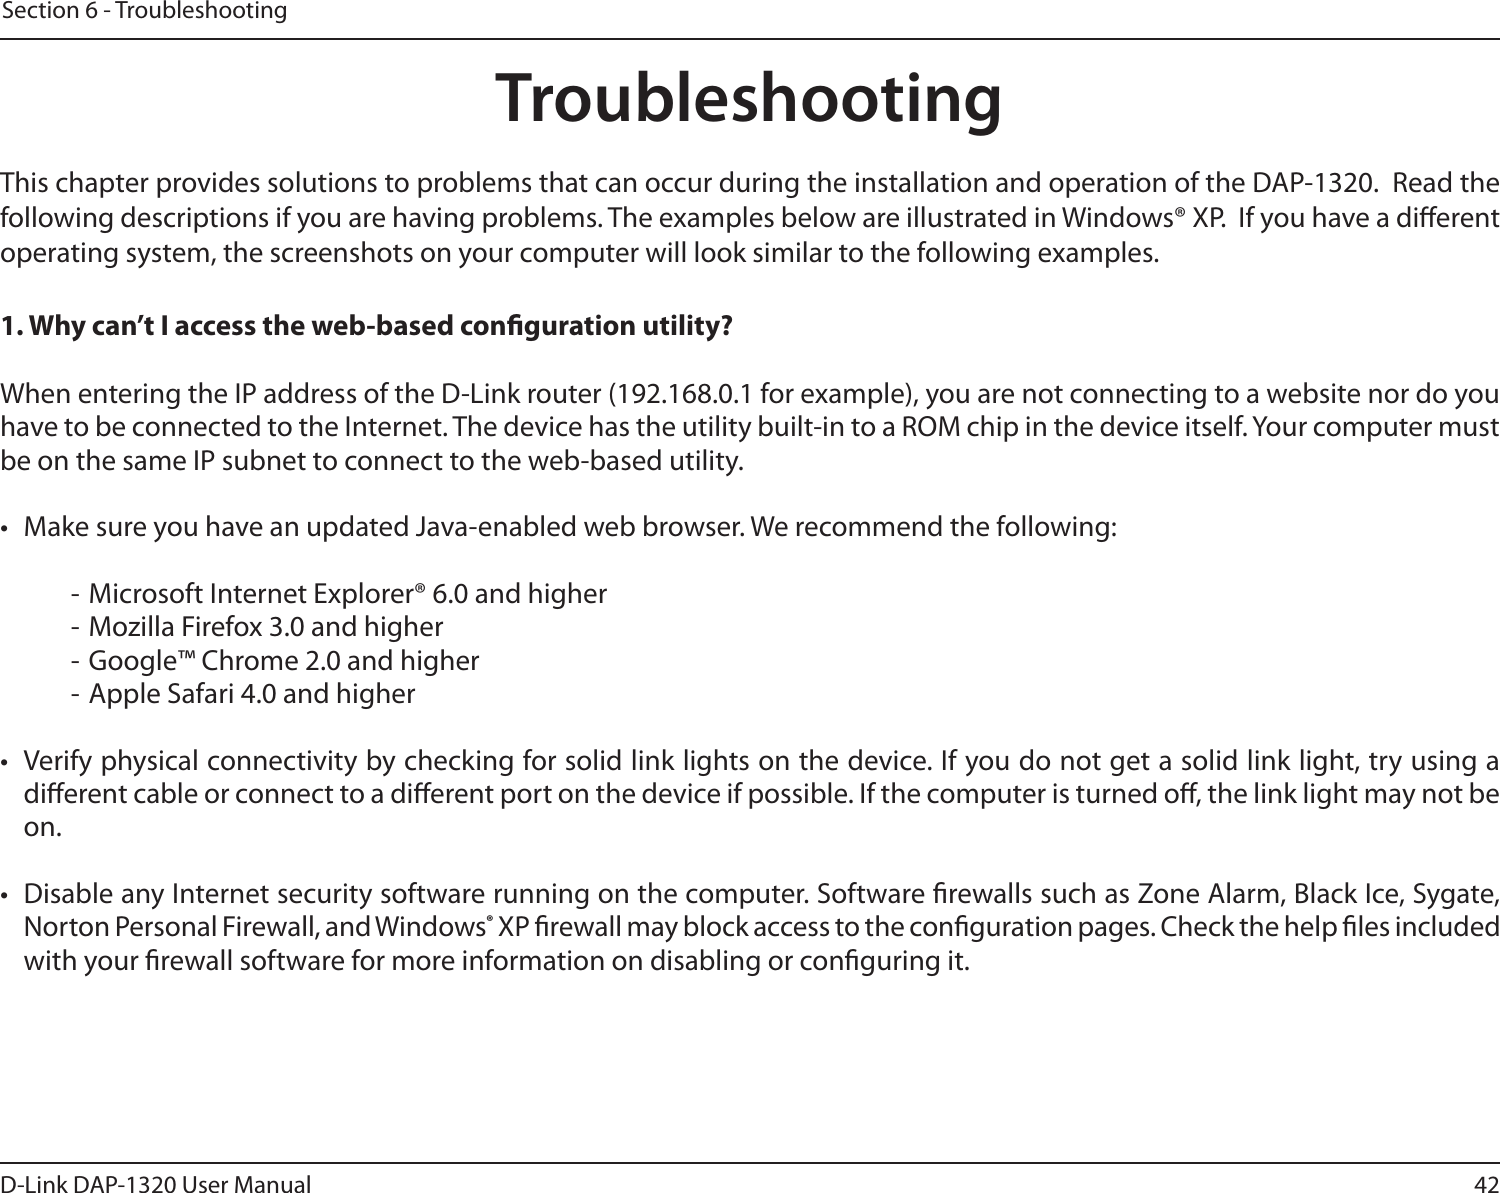 42D-Link DAP-1320 User ManualSection 6 - TroubleshootingTroubleshootingThis chapter provides solutions to problems that can occur during the installation and operation of the DAP-1320.  Read the following descriptions if you are having problems. The examples below are illustrated in Windows® XP.  If you have a dierent operating system, the screenshots on your computer will look similar to the following examples.1. Why can’t I access the web-based conguration utility?When entering the IP address of the D-Link router (192.168.0.1 for example), you are not connecting to a website nor do you have to be connected to the Internet. The device has the utility built-in to a ROM chip in the device itself. Your computer must be on the same IP subnet to connect to the web-based utility. •  Make sure you have an updated Java-enabled web browser. We recommend the following:  - Microsoft Internet Explorer® 6.0 and higher- Mozilla Firefox 3.0 and higher- Google™ Chrome 2.0 and higher- Apple Safari 4.0 and higher•  Verify physical connectivity by checking for solid link lights on the device. If you do not get a solid link light, try using a dierent cable or connect to a dierent port on the device if possible. If the computer is turned o, the link light may not be on.•  Disable any Internet security software running on the computer. Software rewalls such as Zone Alarm, Black Ice, Sygate, Norton Personal Firewall, and Windows® XP rewall may block access to the conguration pages. Check the help les included with your rewall software for more information on disabling or conguring it.